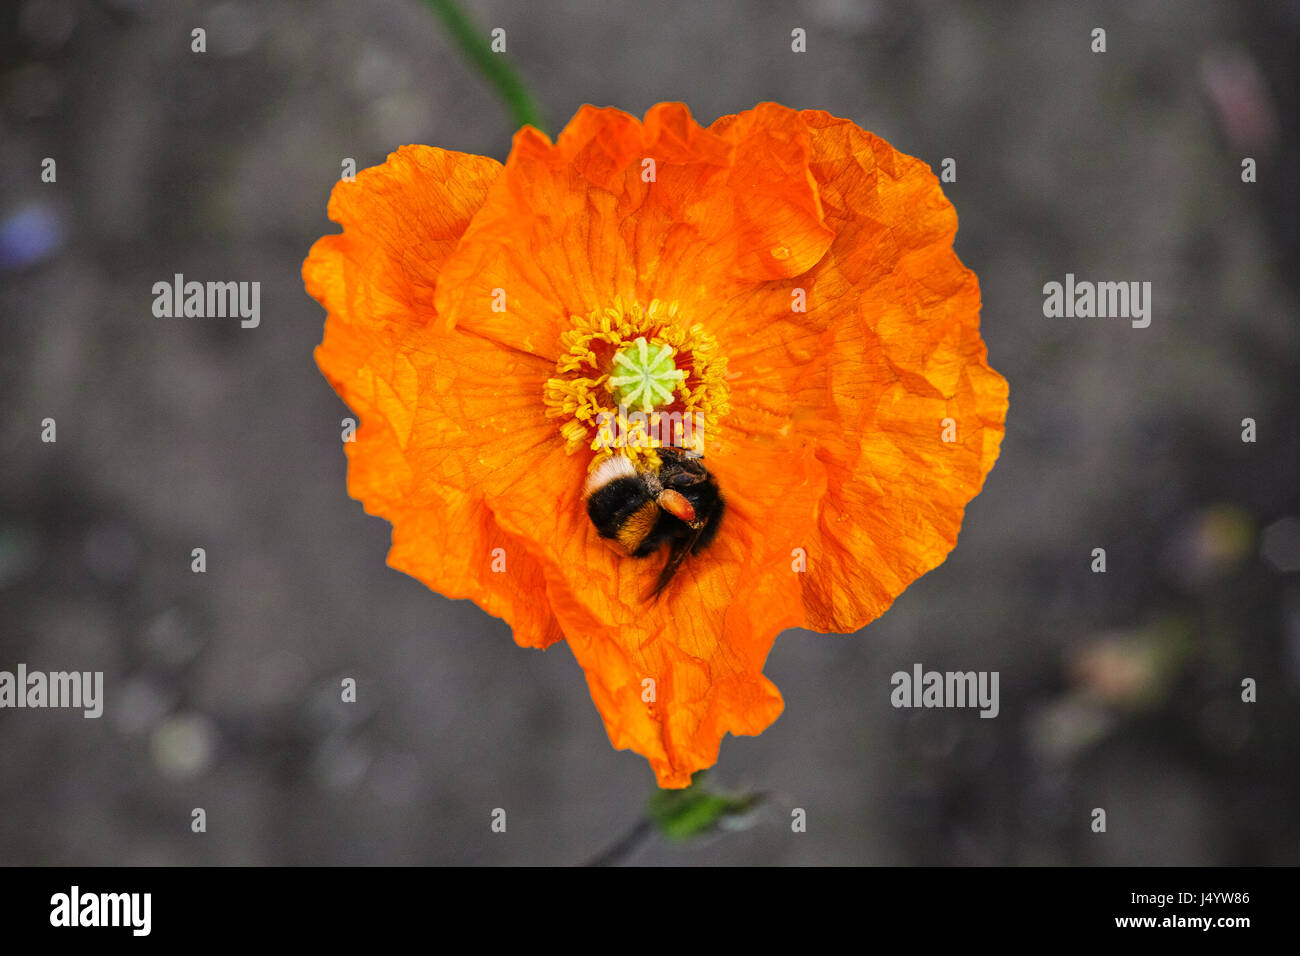 Bee hunting for pollen in an orange poppy in the garden of a house in Camden Town, London, England. Bee has a pollen basket on its leg Stock Photo